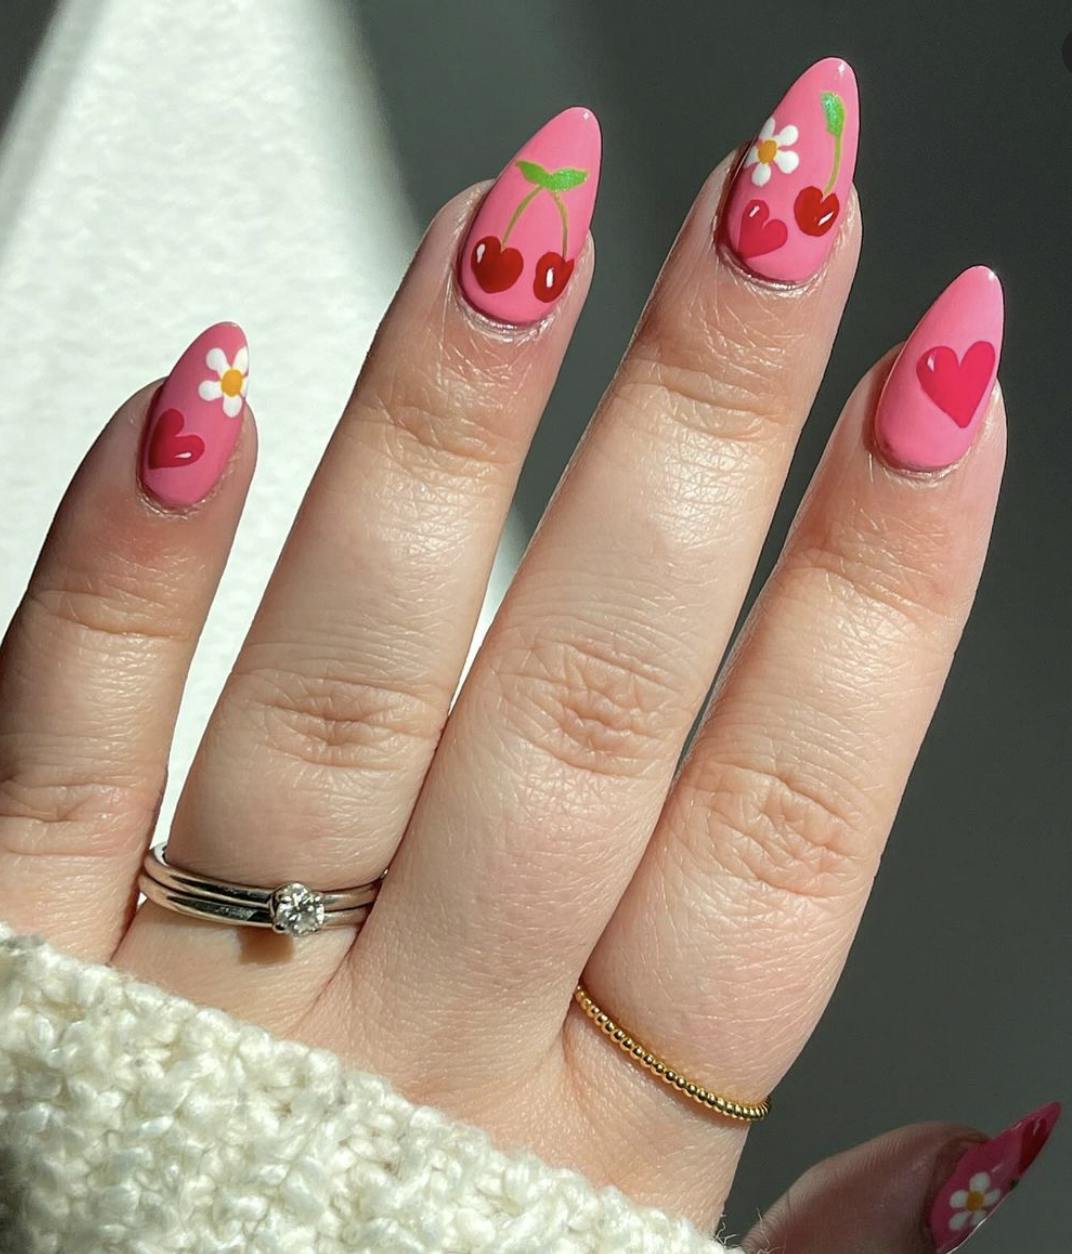 10 Elegant Acrylic Nail Art Designs for a Special Occasion! | Pink nail art,  Best acrylic nails, Nail art